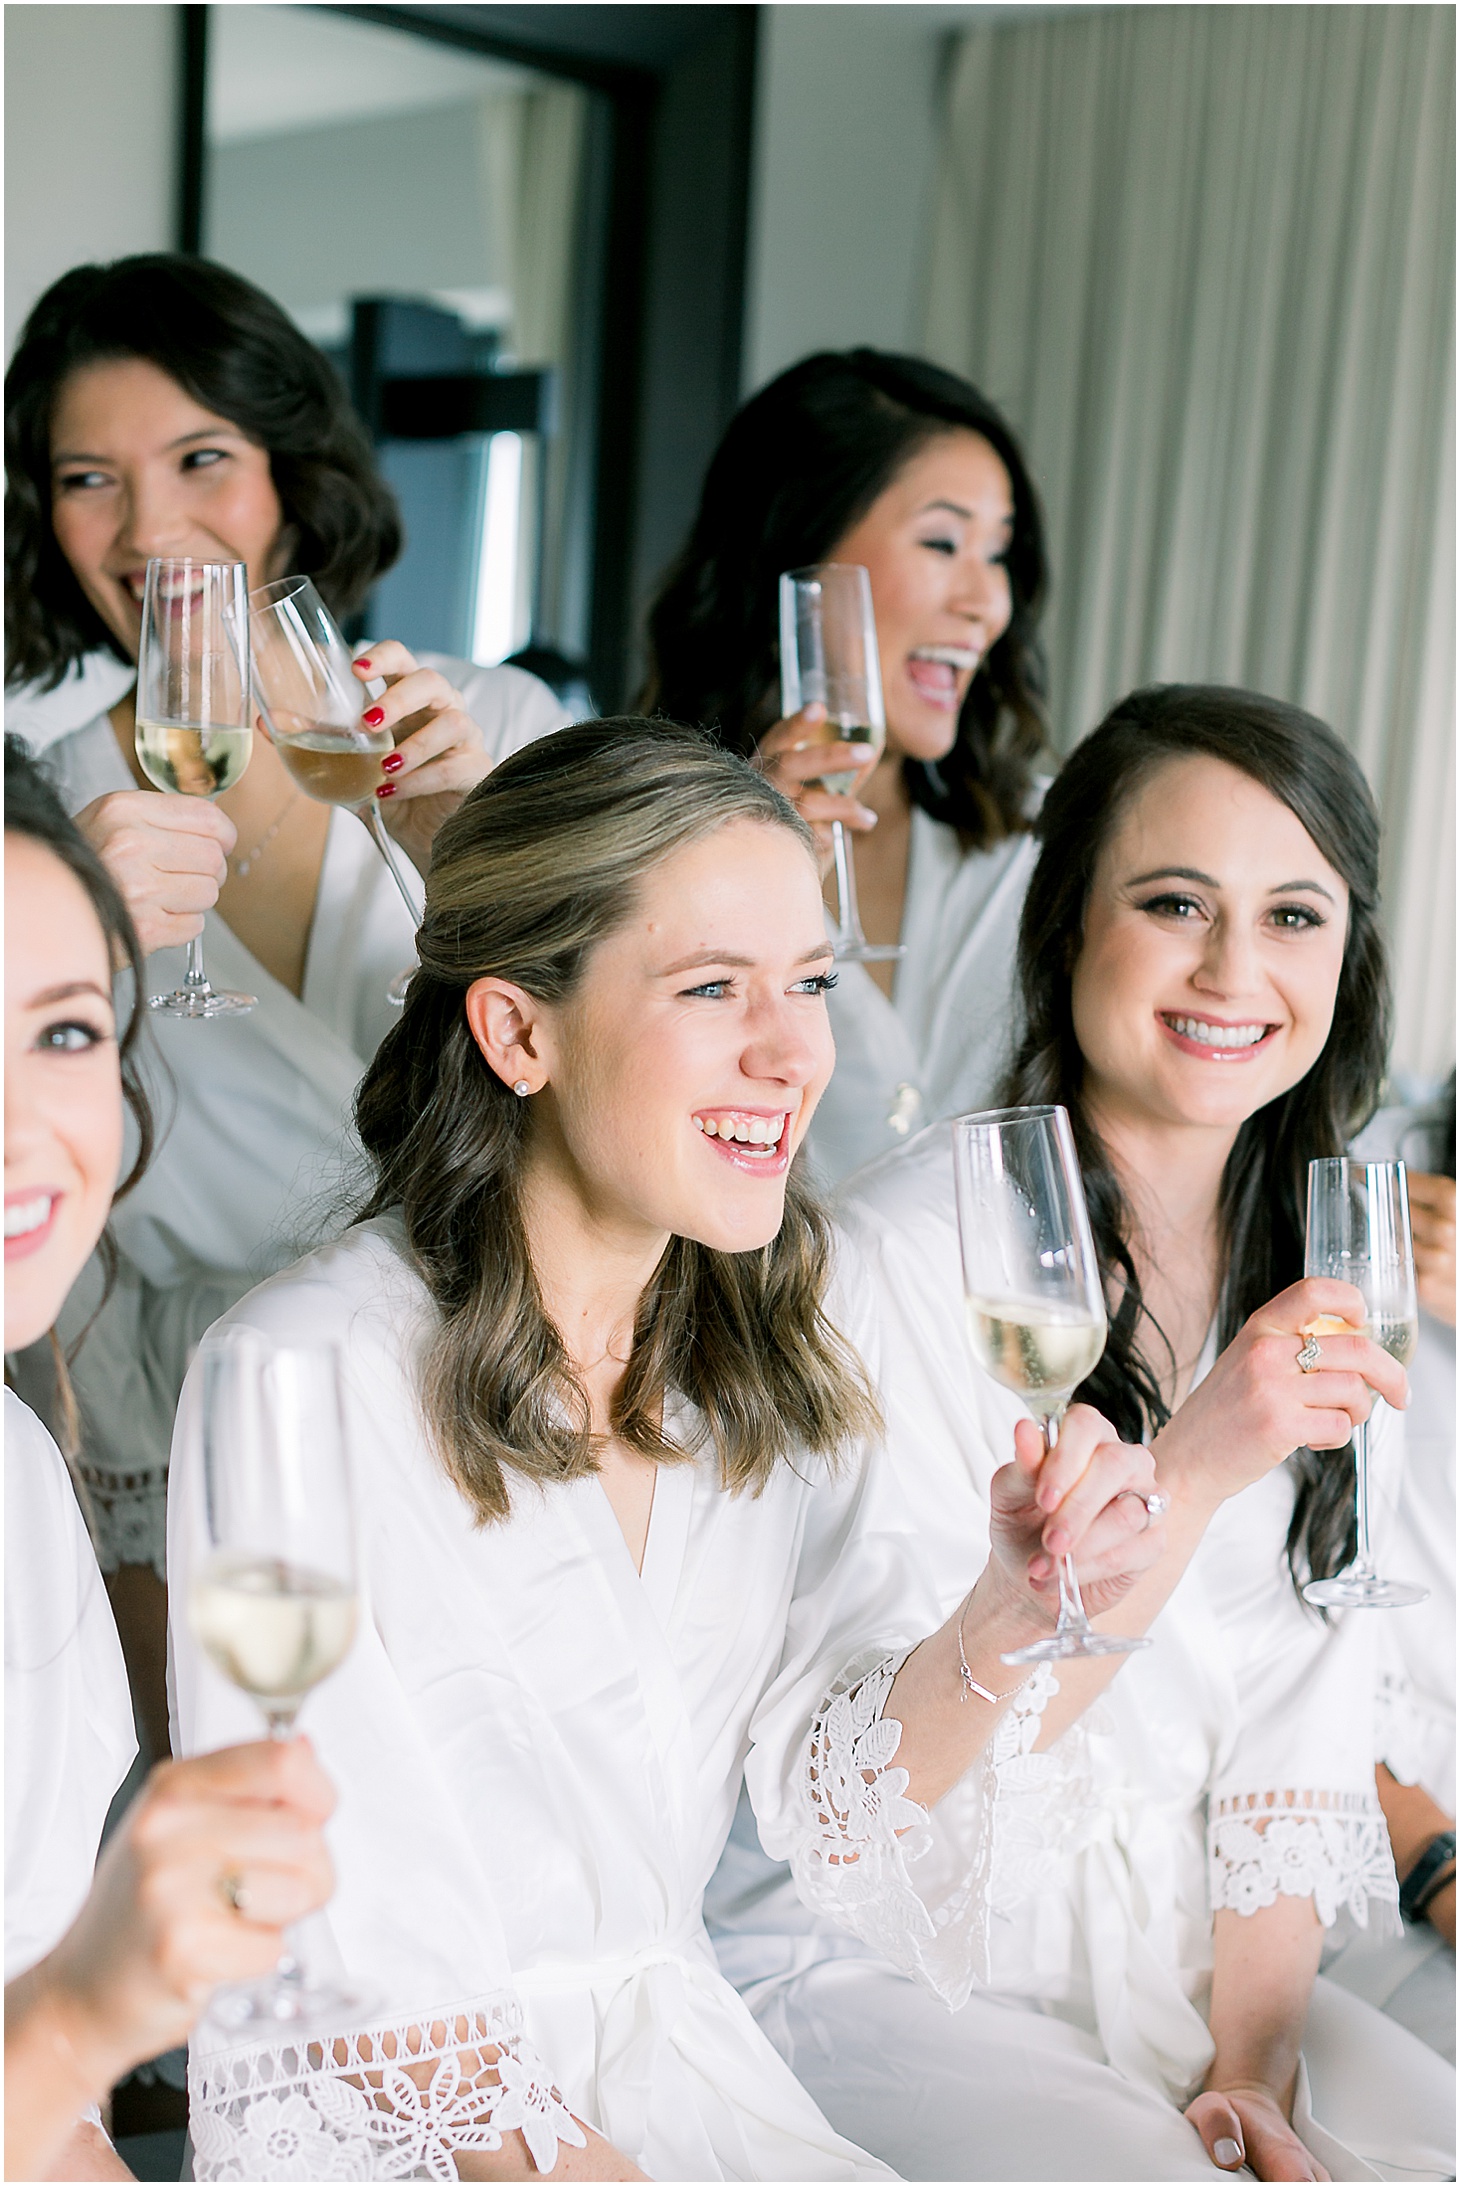 Bridal Party Getting Ready at Inter-Continental Hotel at Navy Yards in DC, Modern Textural Spring Wedding at District Winery, Sarah Bradshaw Photography, DC Wedding Photographer